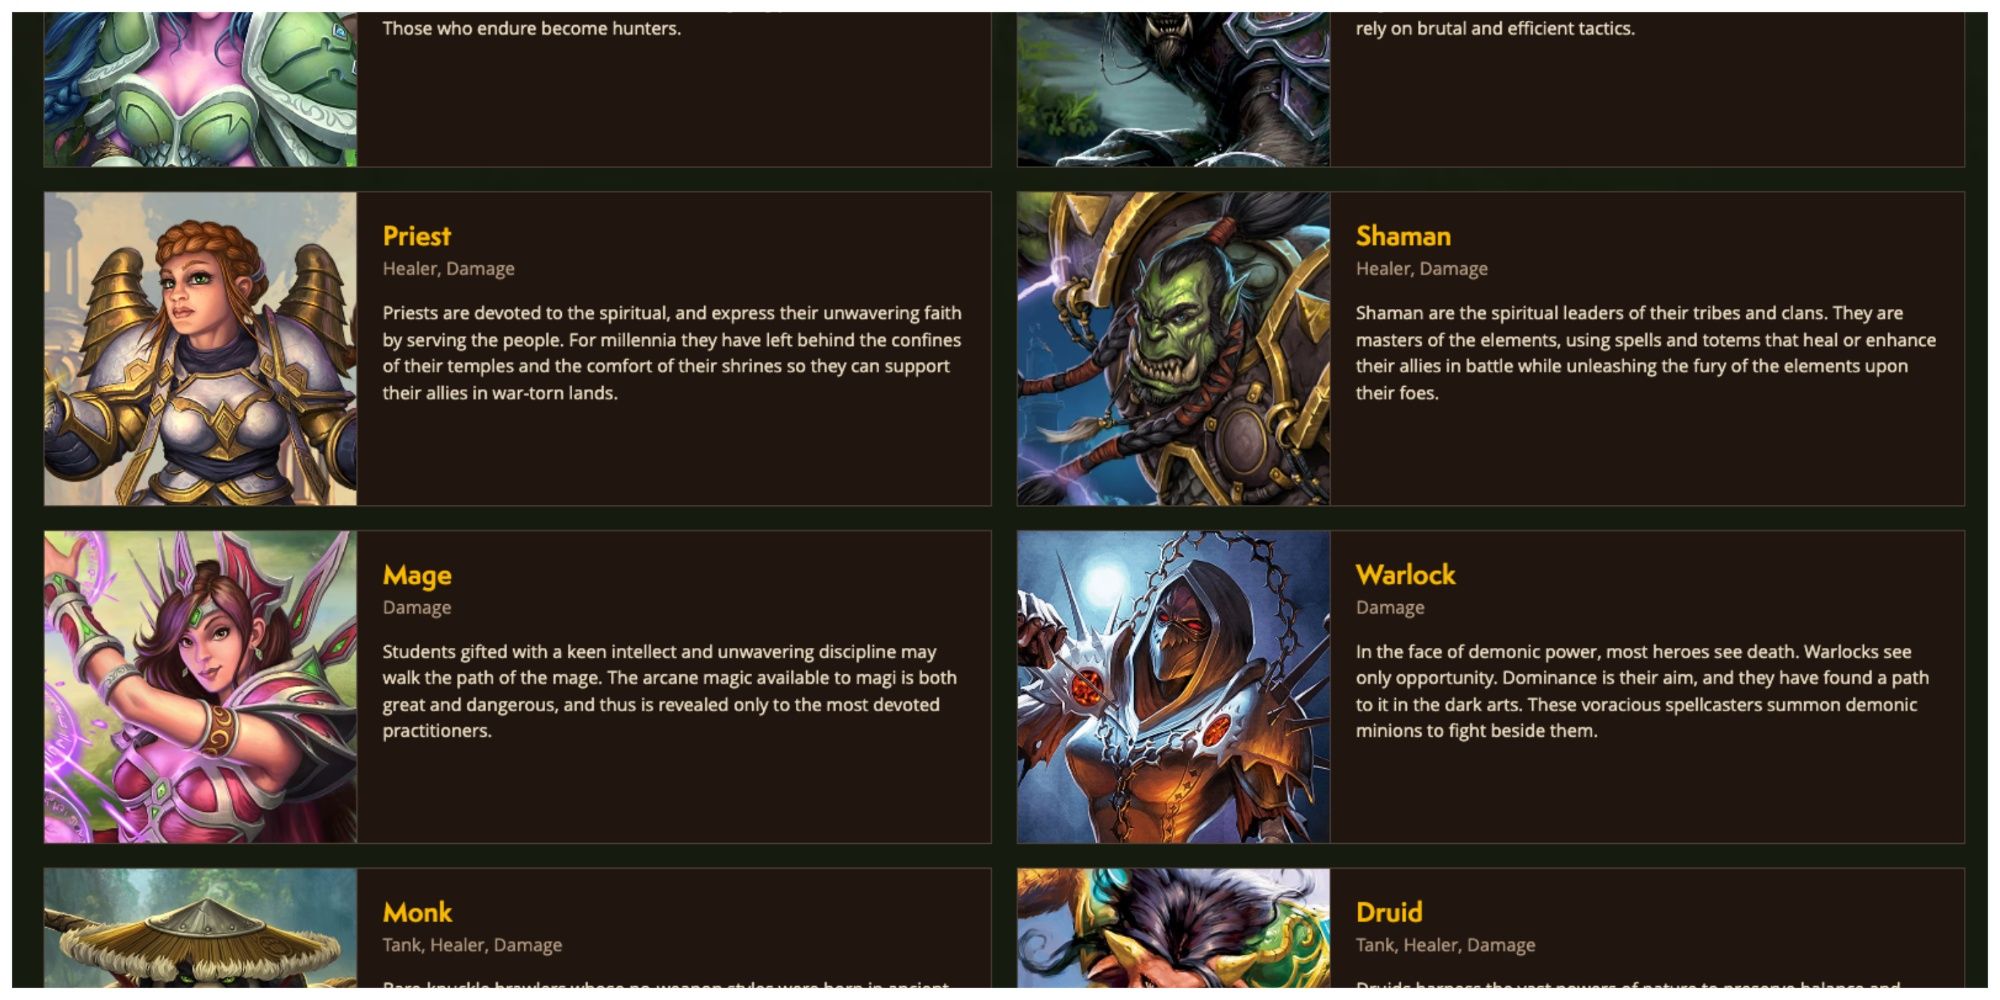 Classes overview in World of Warcraft website